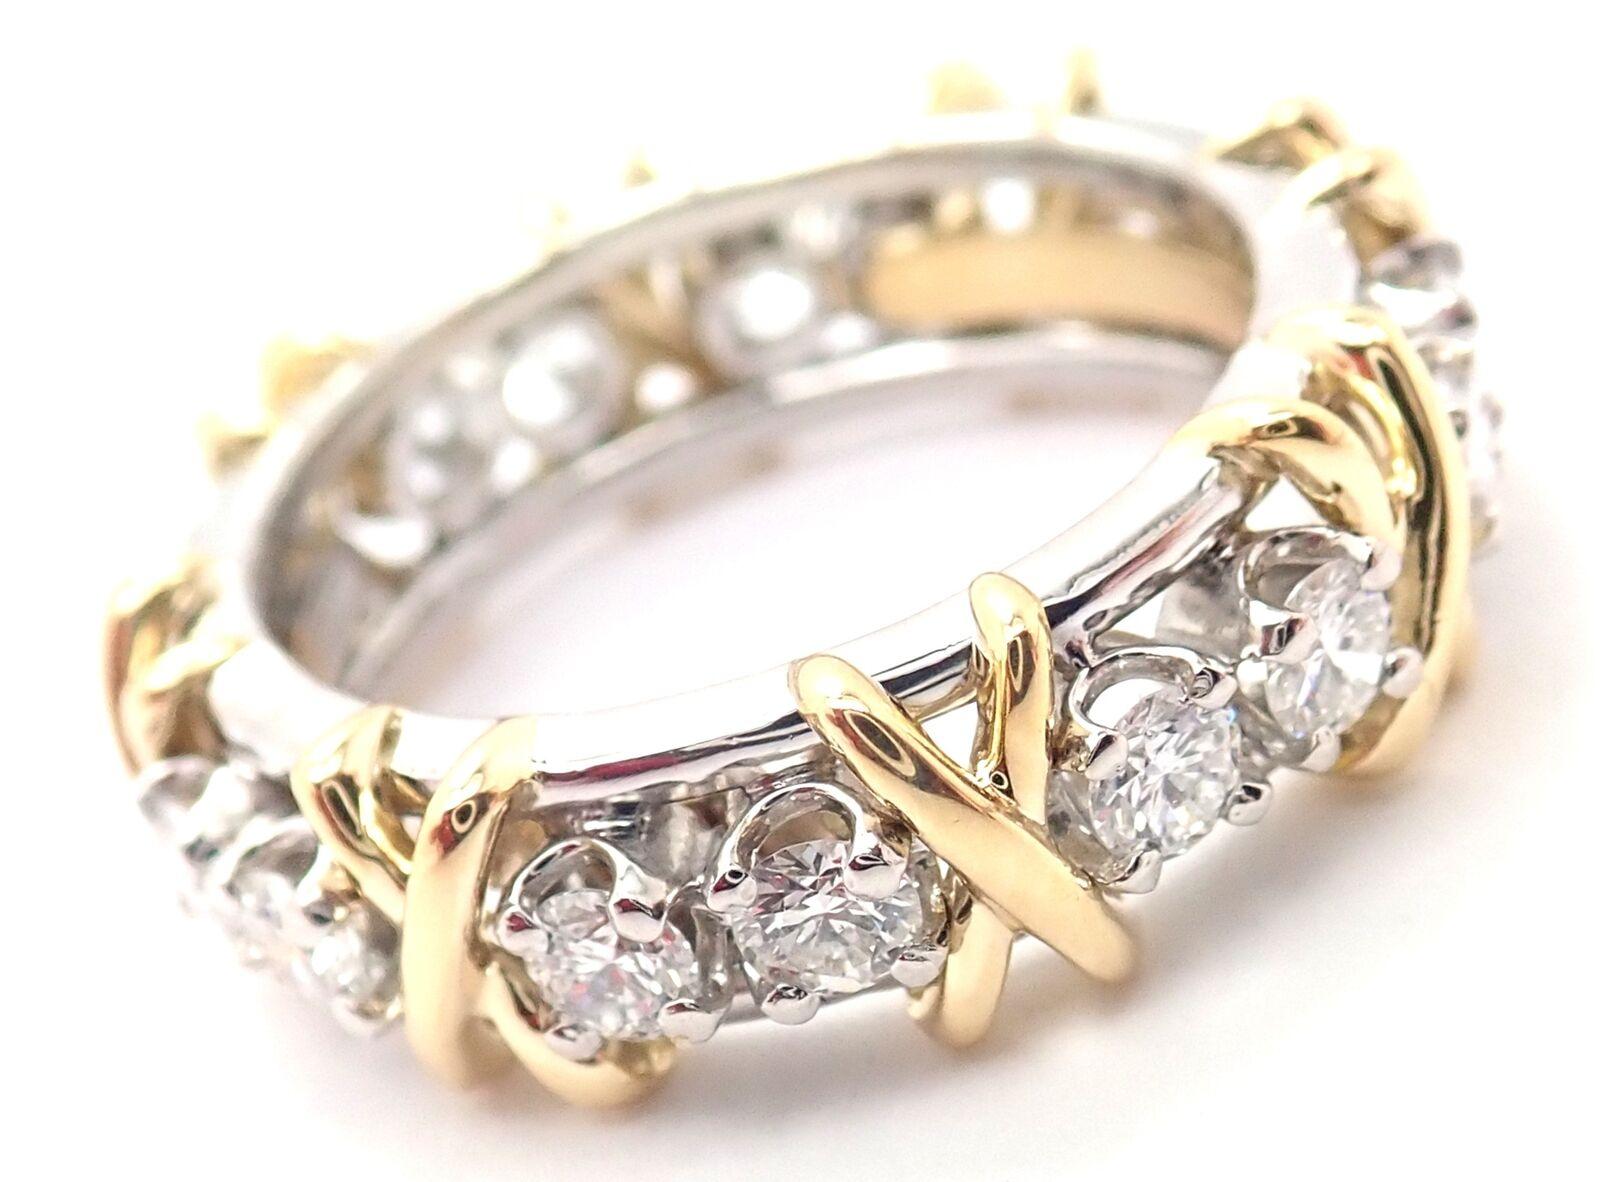 18k Yellow Gold & Platinum Diamond Jean Schlumberger Band Ring designed for Tiffany & Co. 
With 16 Round Brilliant Cut Diamonds VS1 clarity, G color, Total weight Approx 1.14ct
This ring comes with Tiffany Box.
Details:
Ring Size: 6.25
Weight: 10.1